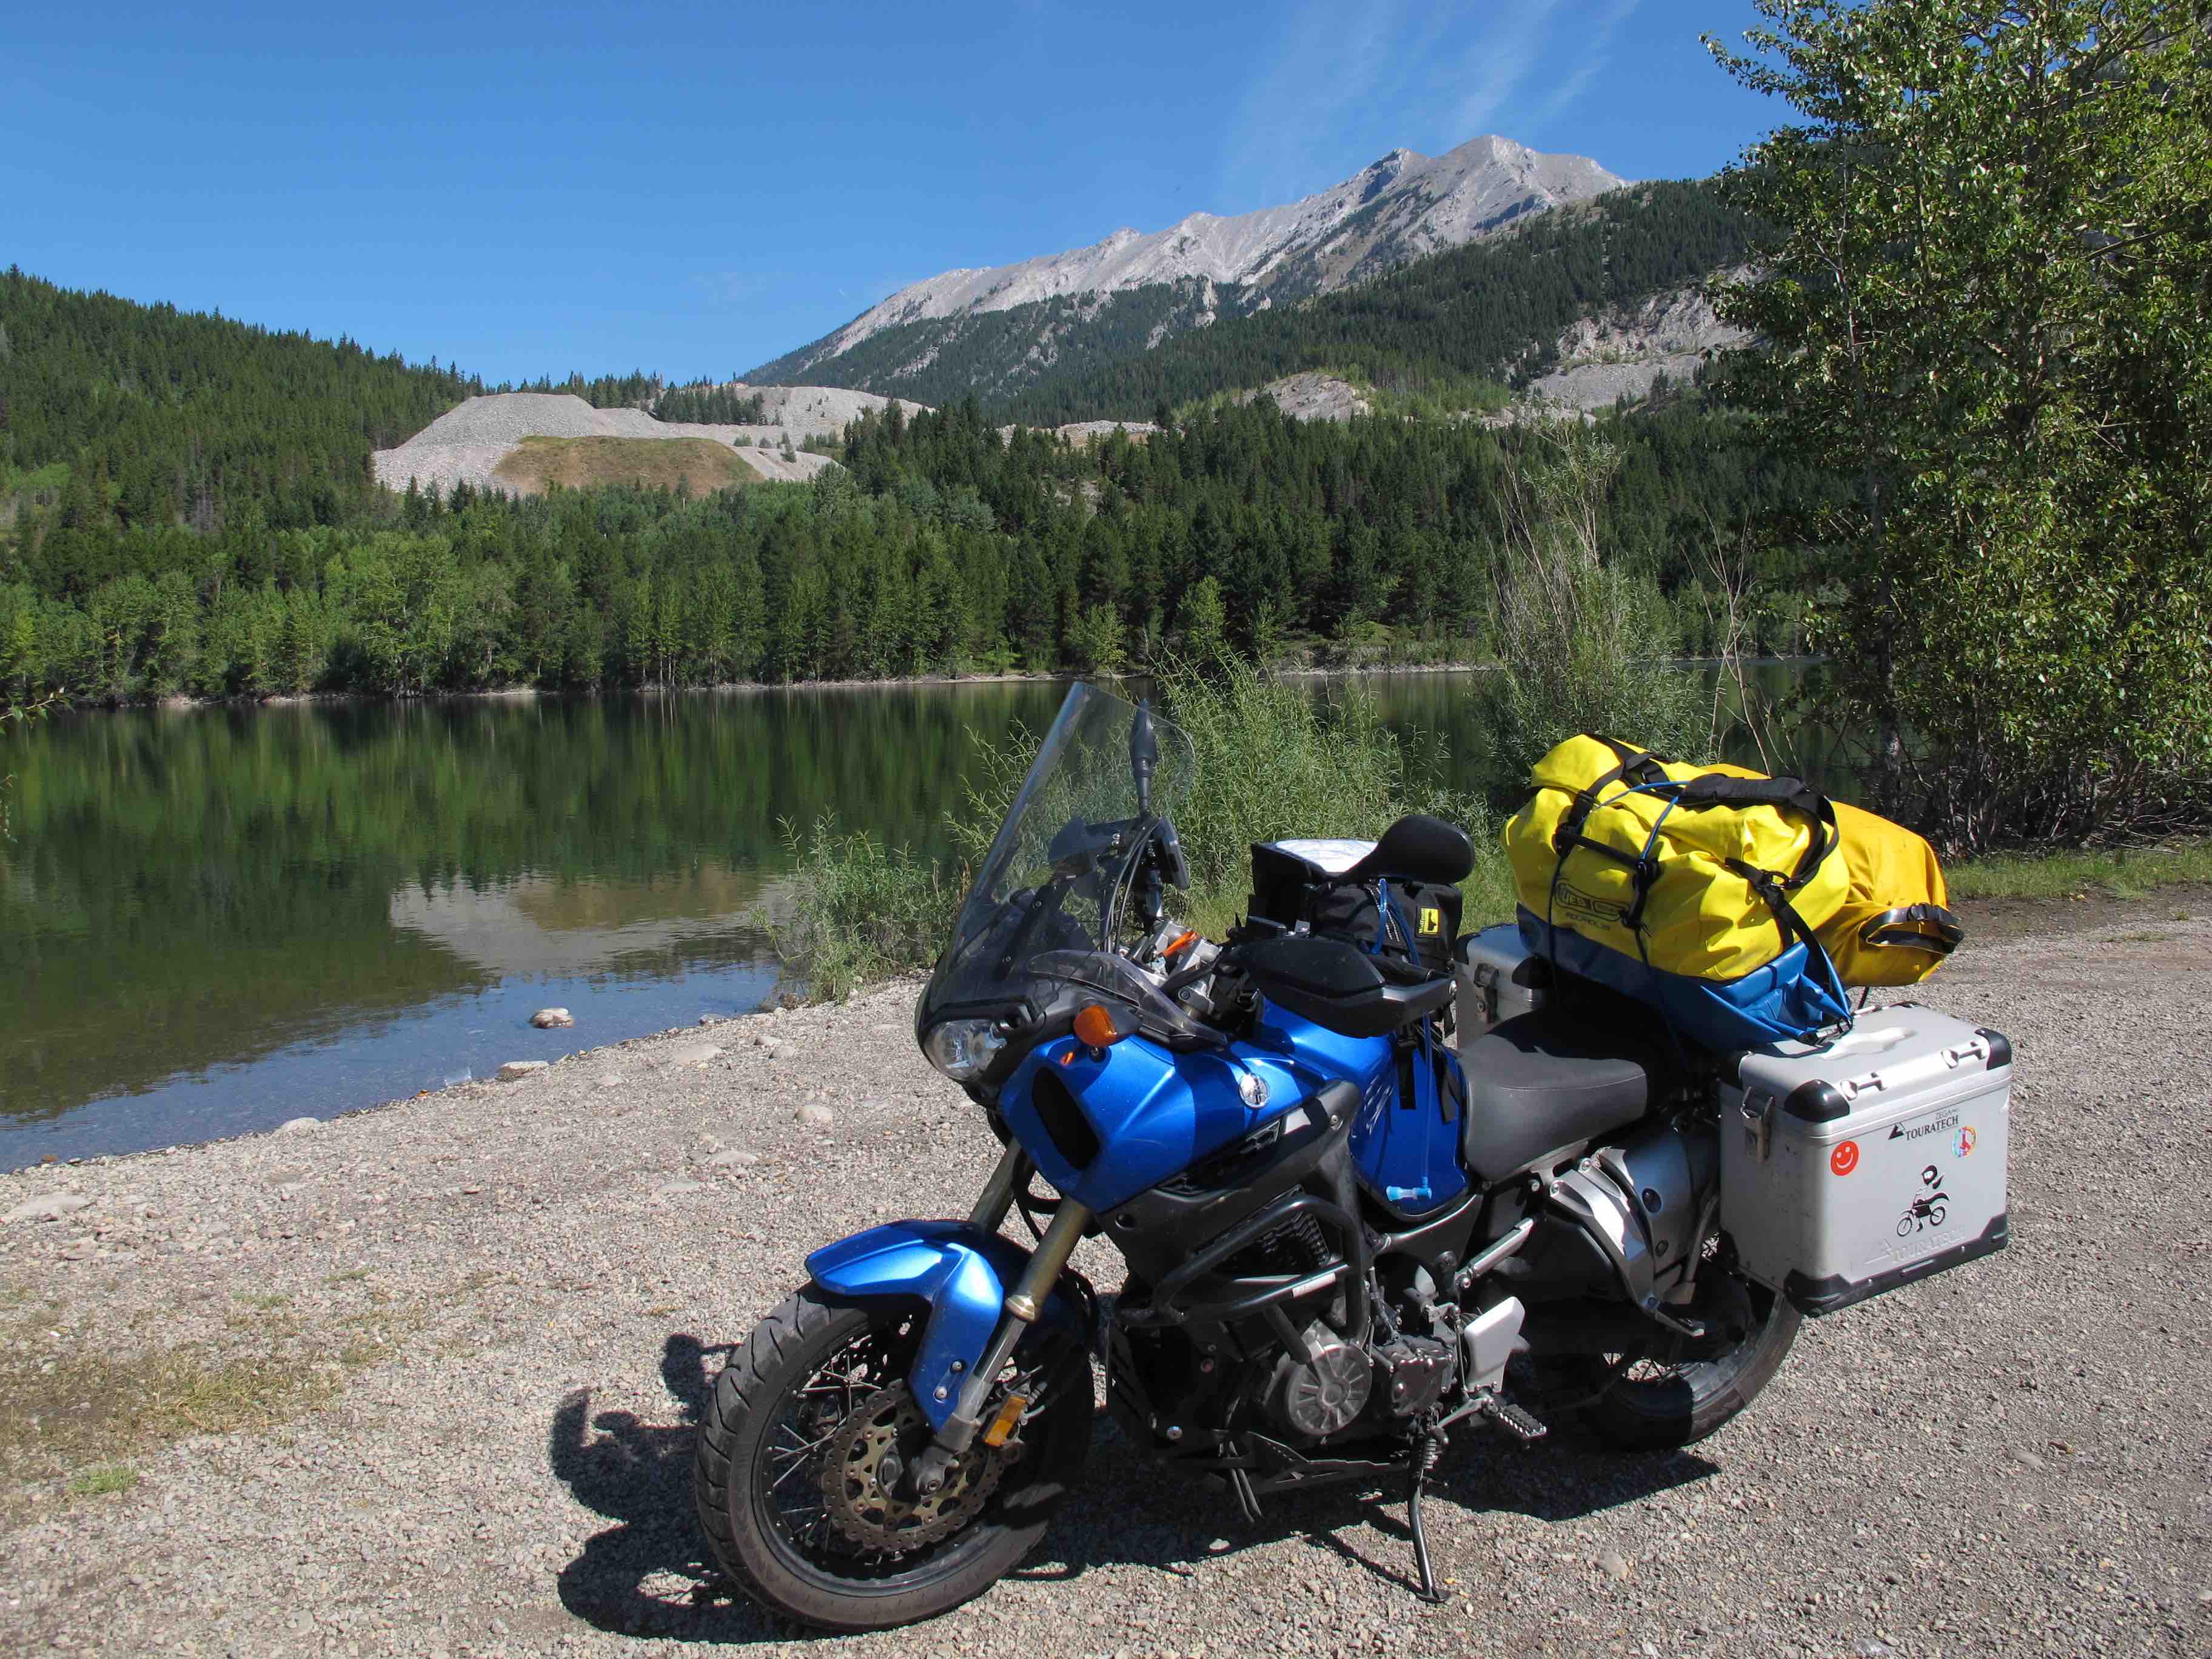 5 Things I Learned from Solo Motorcycle Travel - Liz Jansen